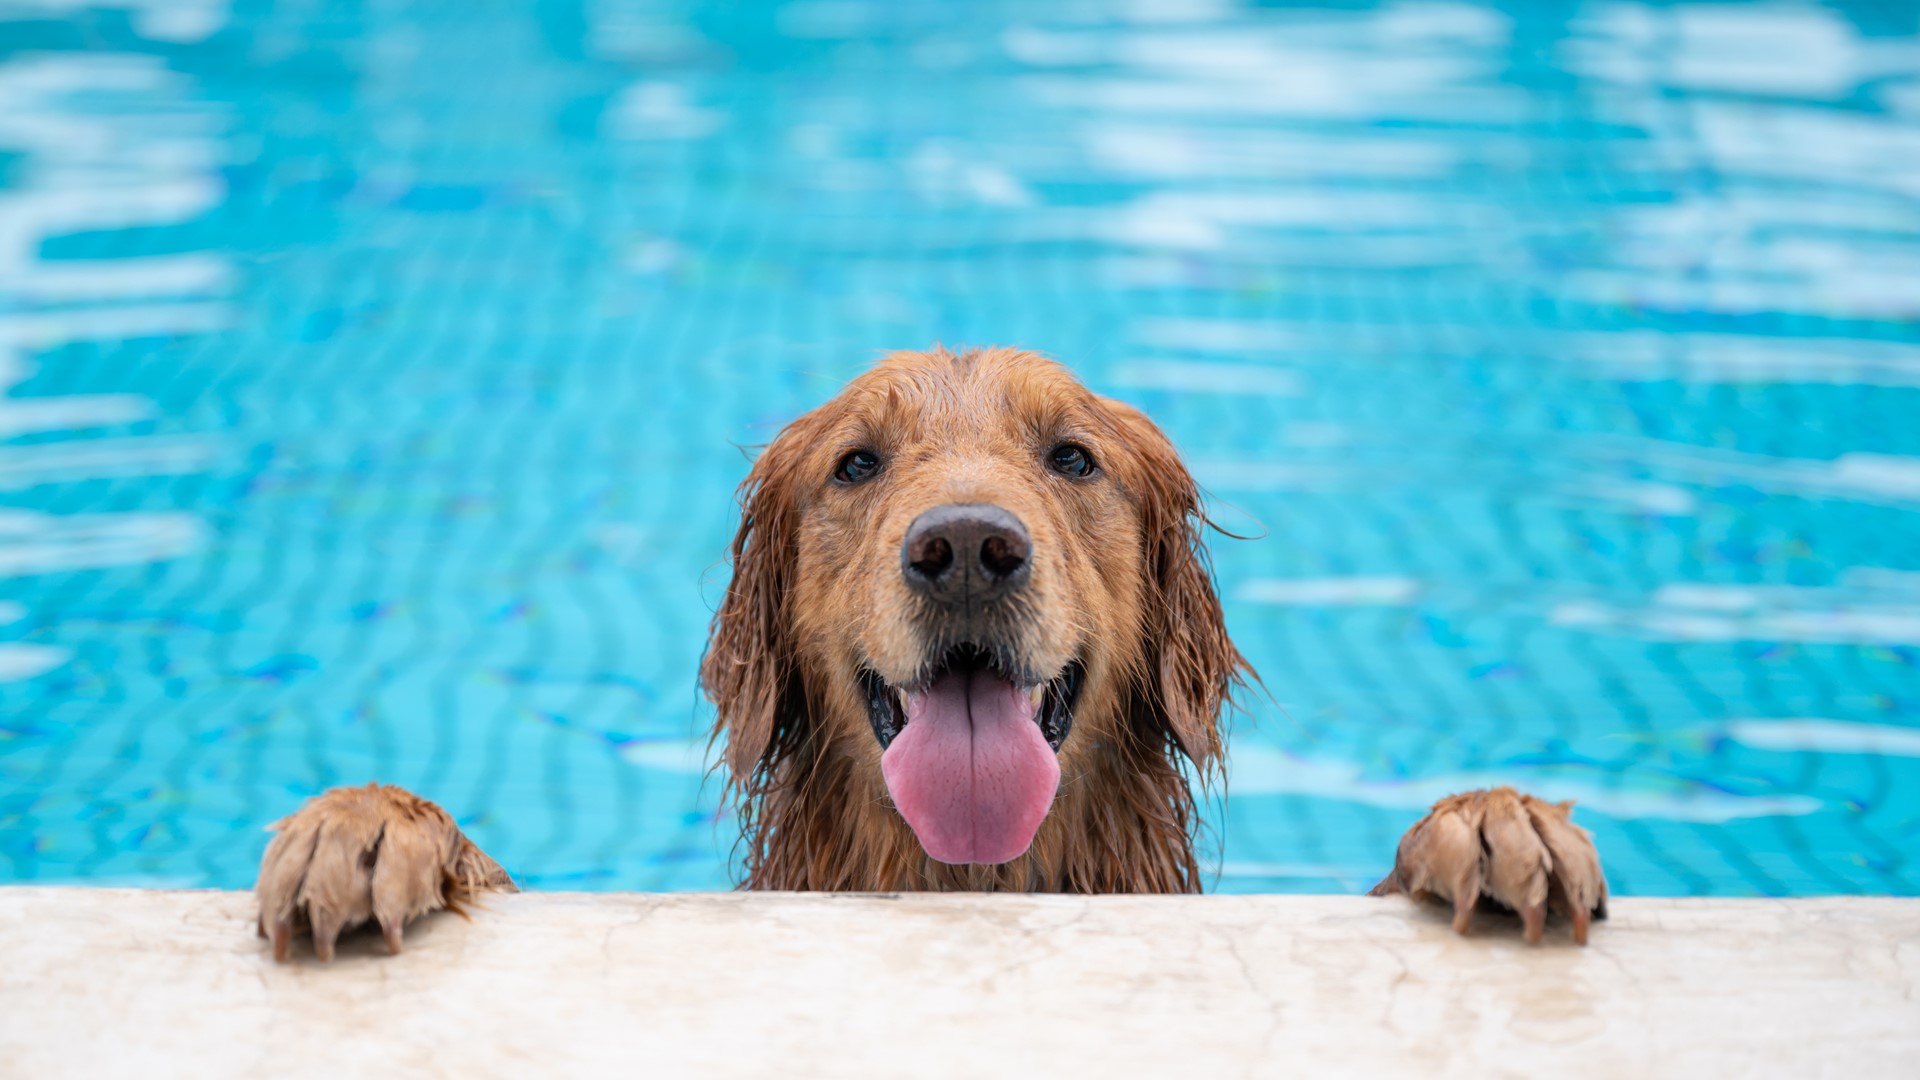 Several pools around the St. Louis area have closed to humans for the season, and are opening for the canines. Dogs are invited to swim for a day at these locations.